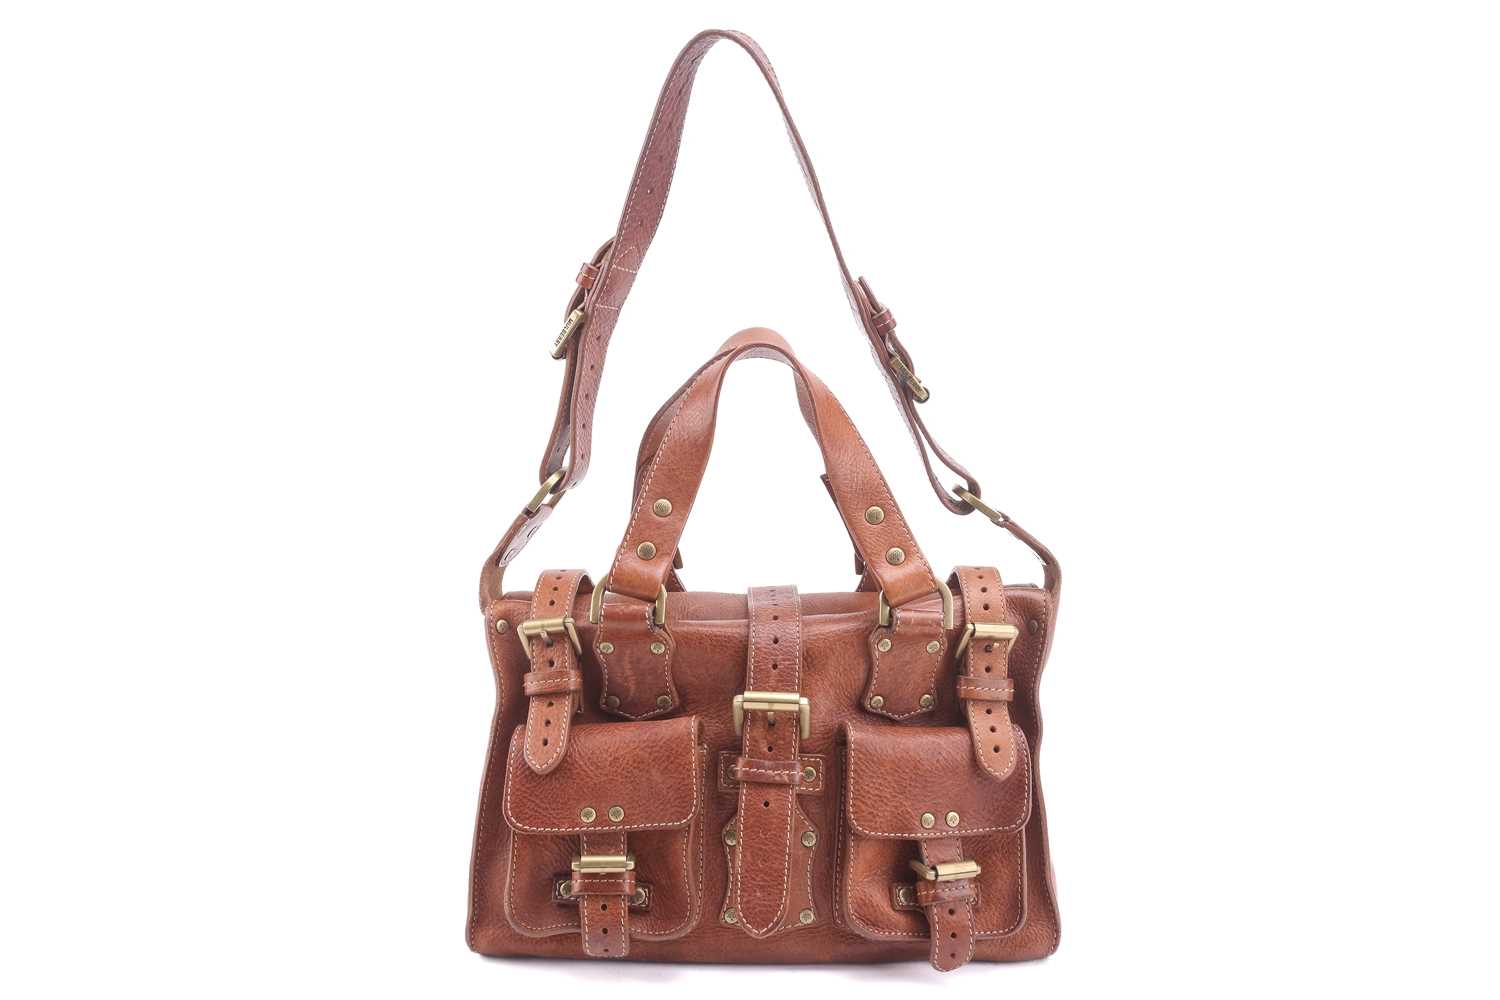 Mulberry - 'Roxanne' satchel in tanned leather, with external pockets, belt closure, equipped with - Image 2 of 9